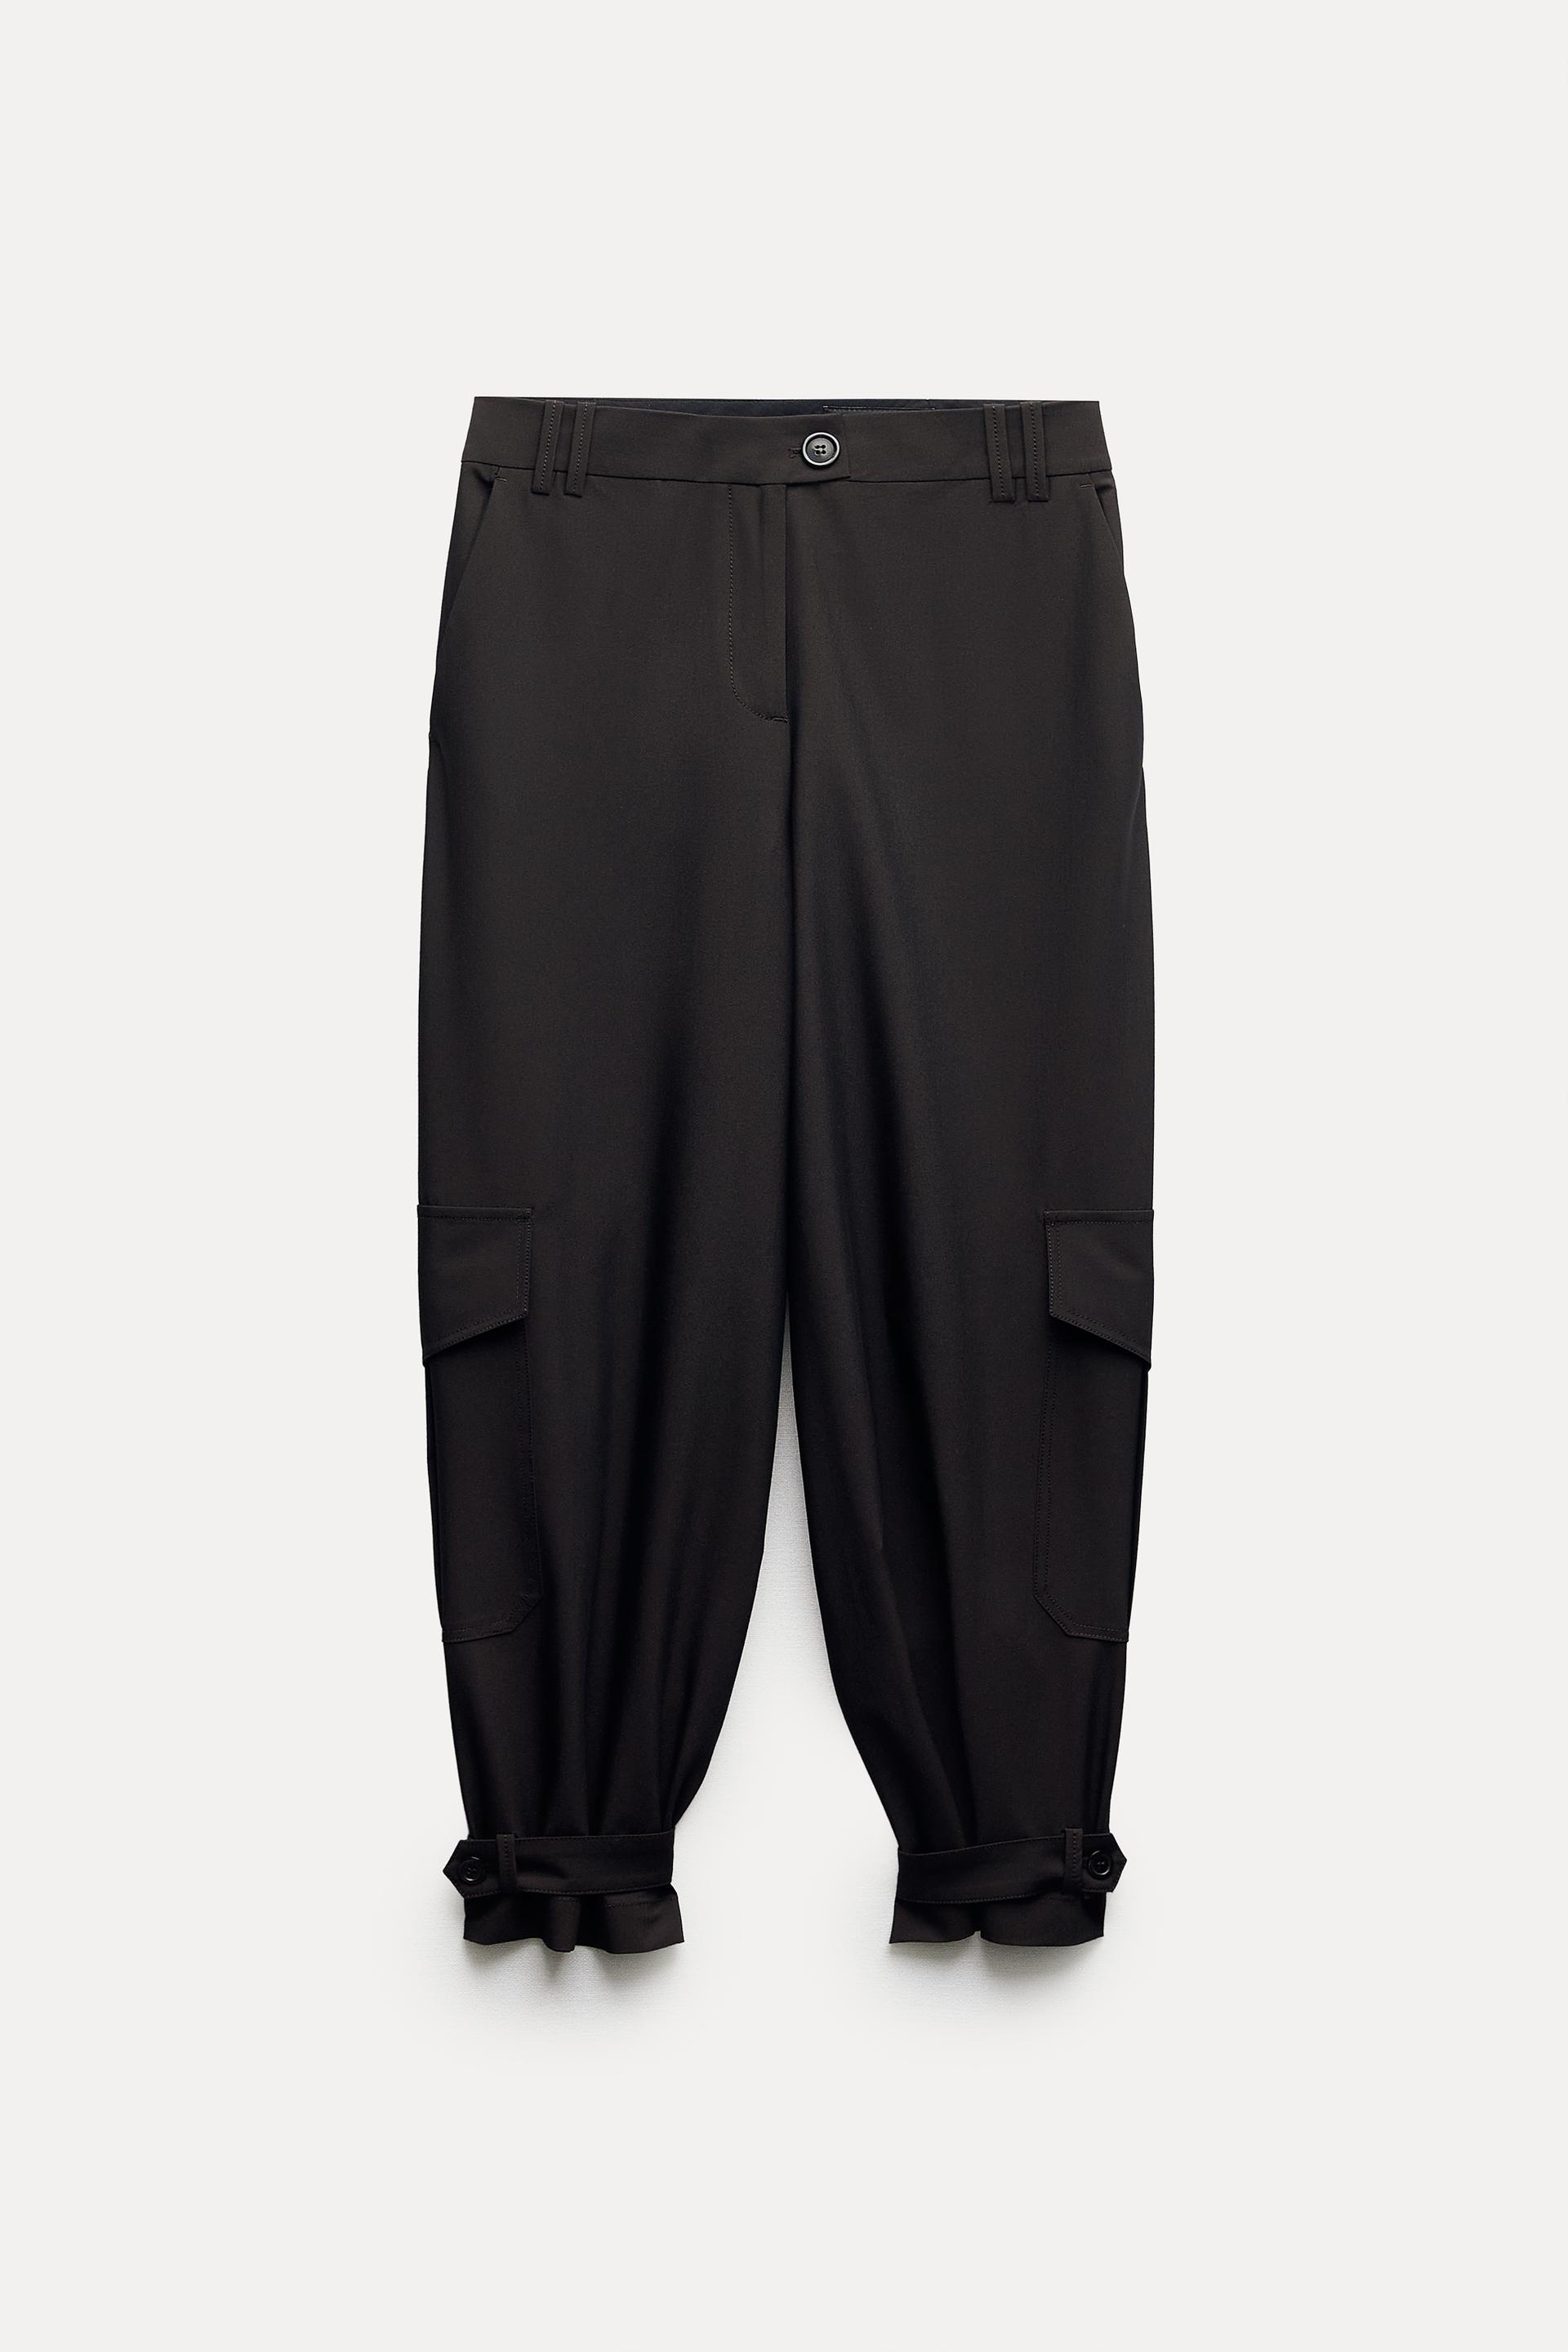 NWT Zara Black Trousers With Side Pockets in XS  Black trousers, Zara  black, Leather jogger pants